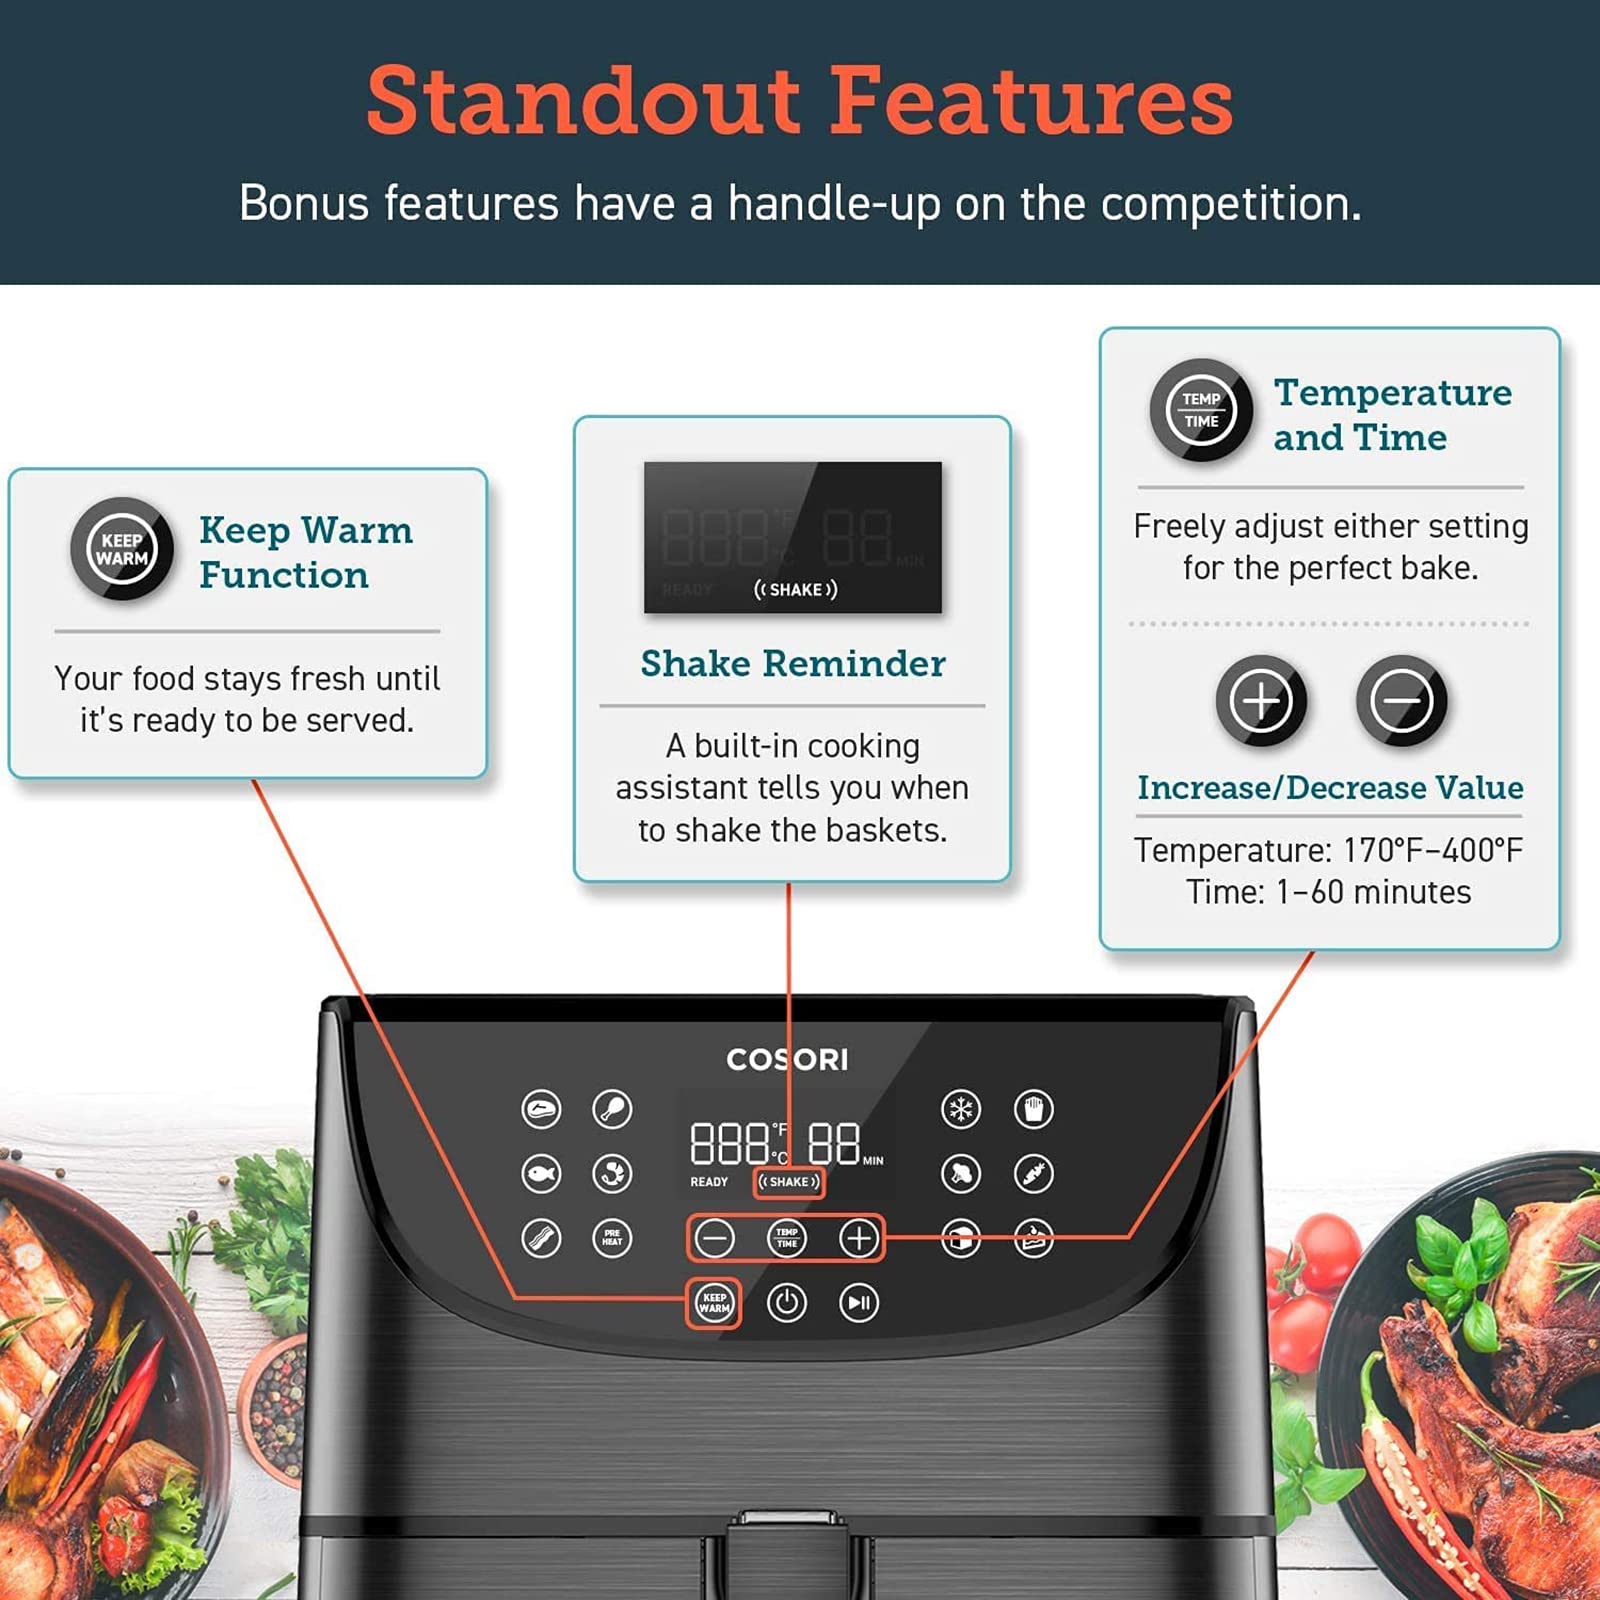 COSORI Pro Air Fryer Oven Combo, 5.8QT Max Xl Large Cooker with 100 Recipes, One-Touch Screen with 11 Presets and Shake Reminder, Nonstick and Dishwasher-Safe Detachable Square Basket, Black